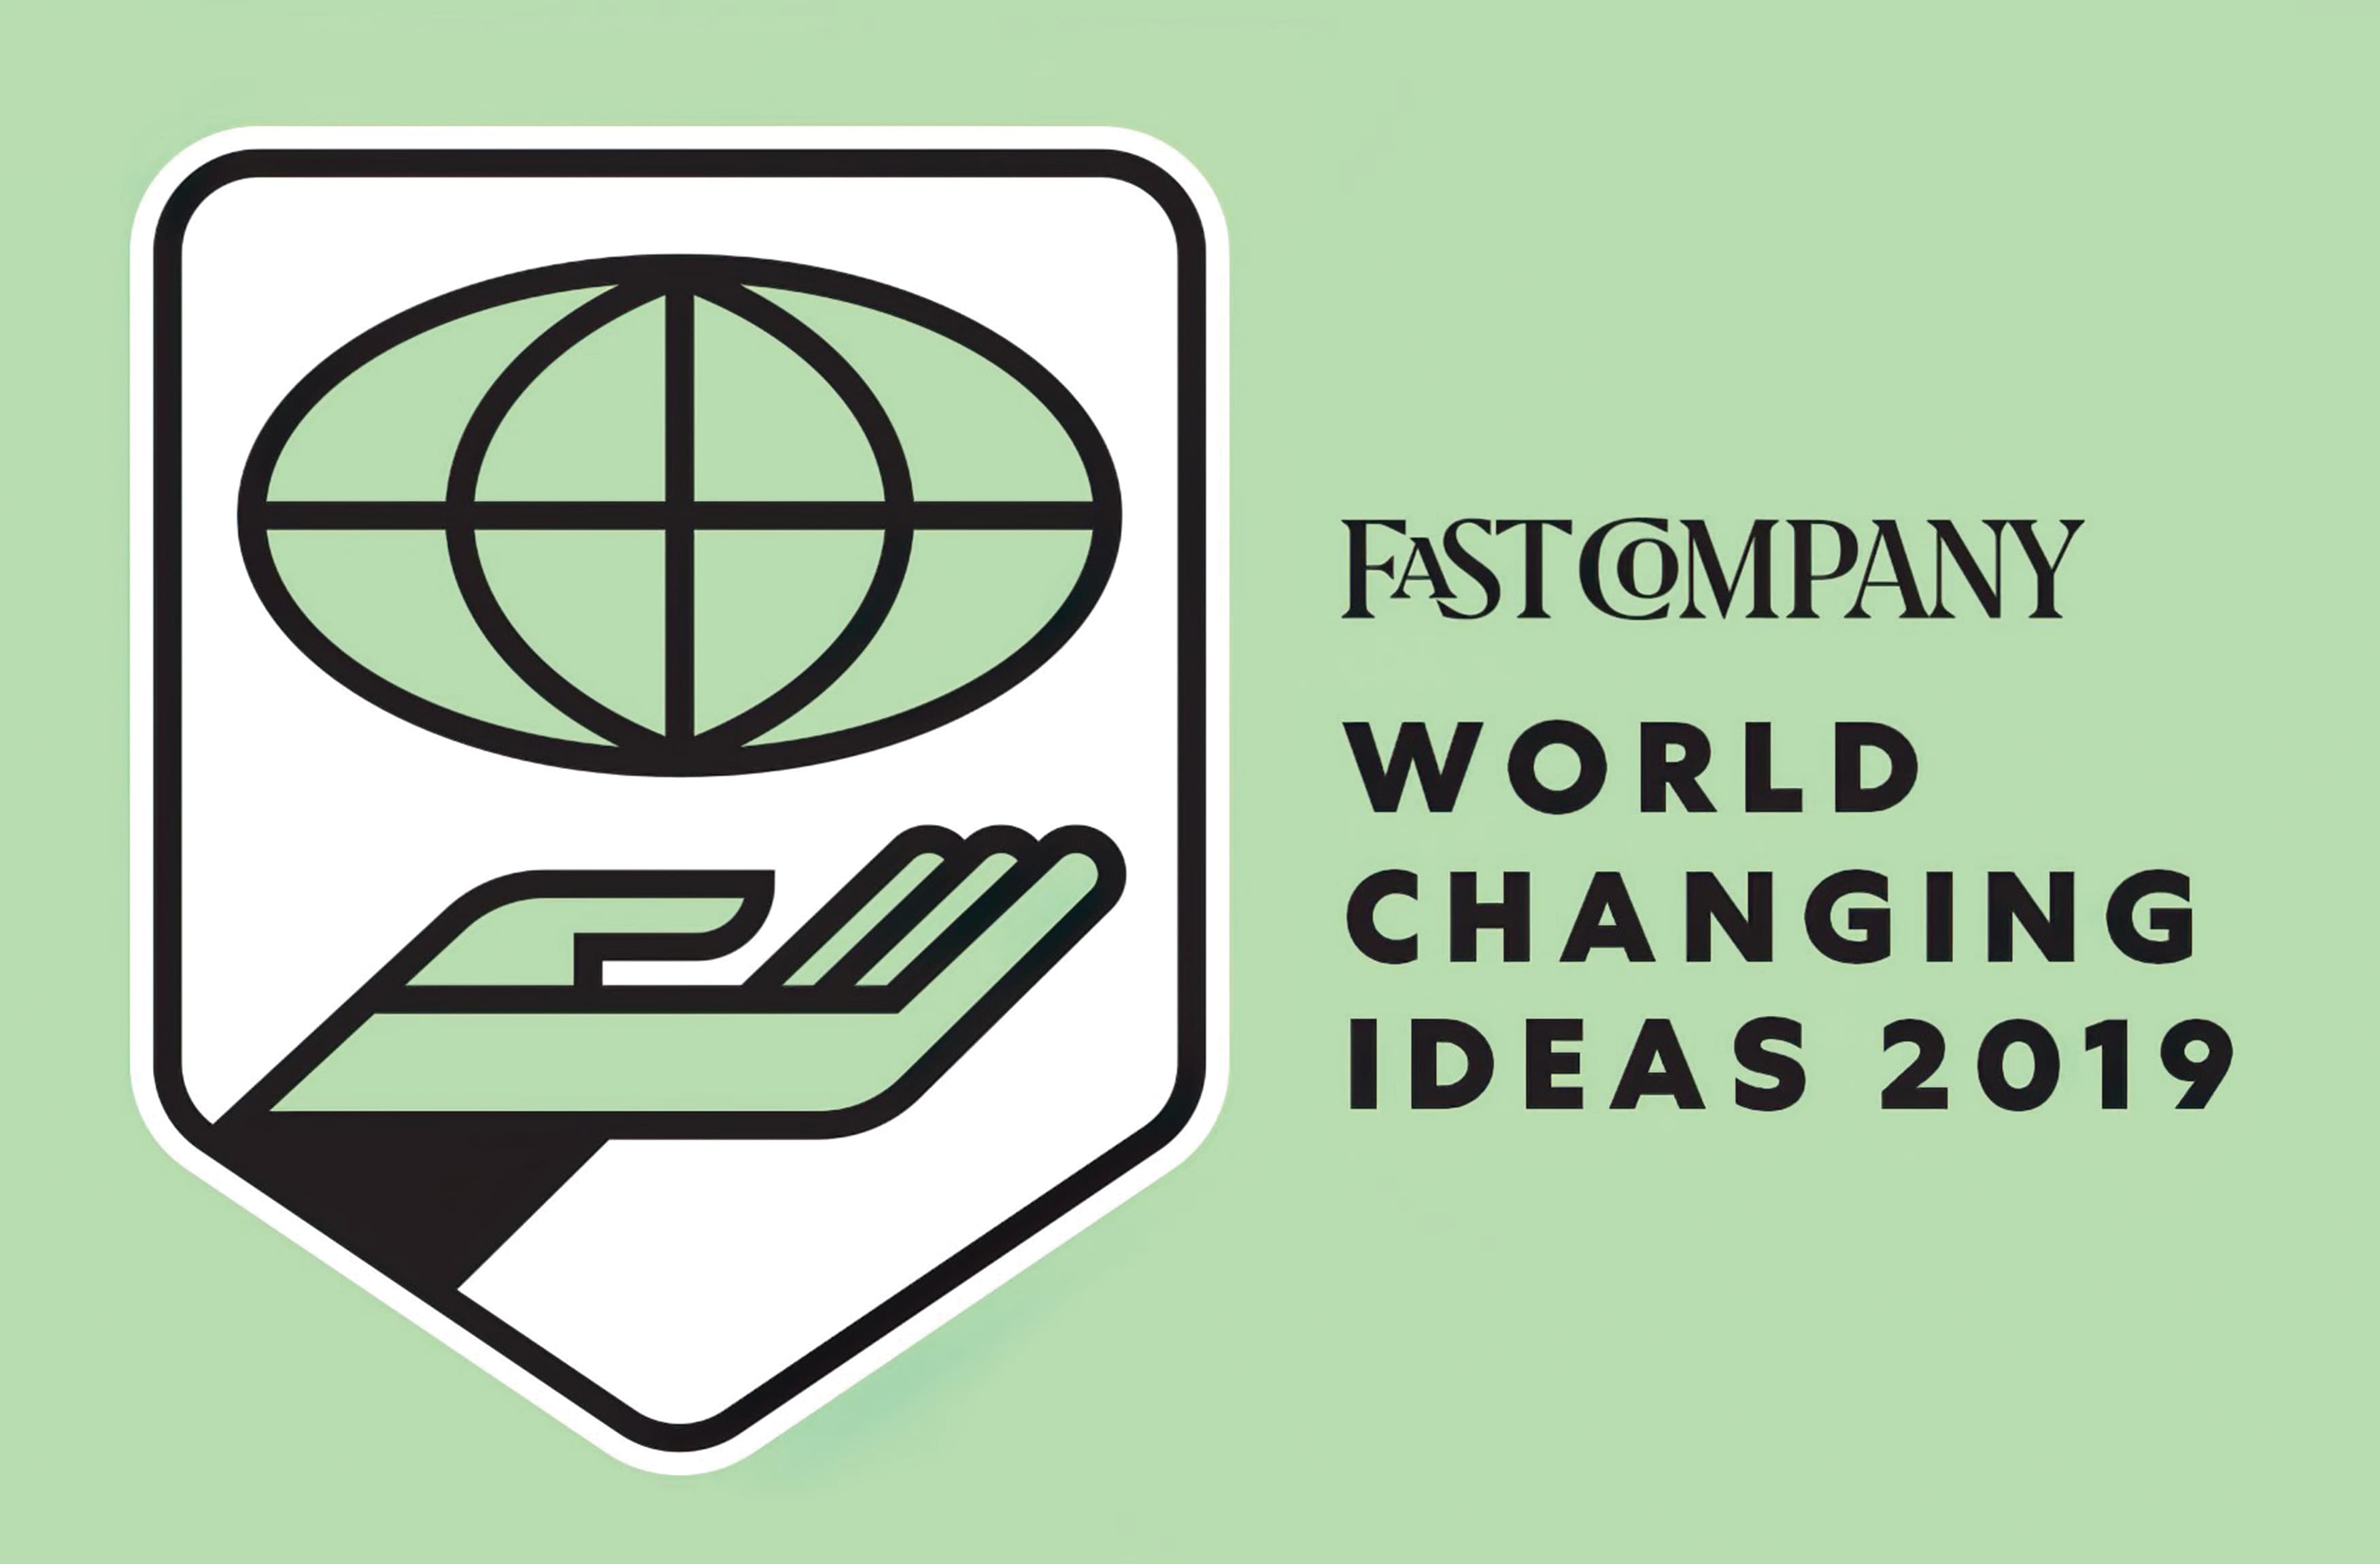 Changing Ideas is one of Fast Company’s major annual awards programs and is focused on social good, seeking to elevate finished products and brave concepts